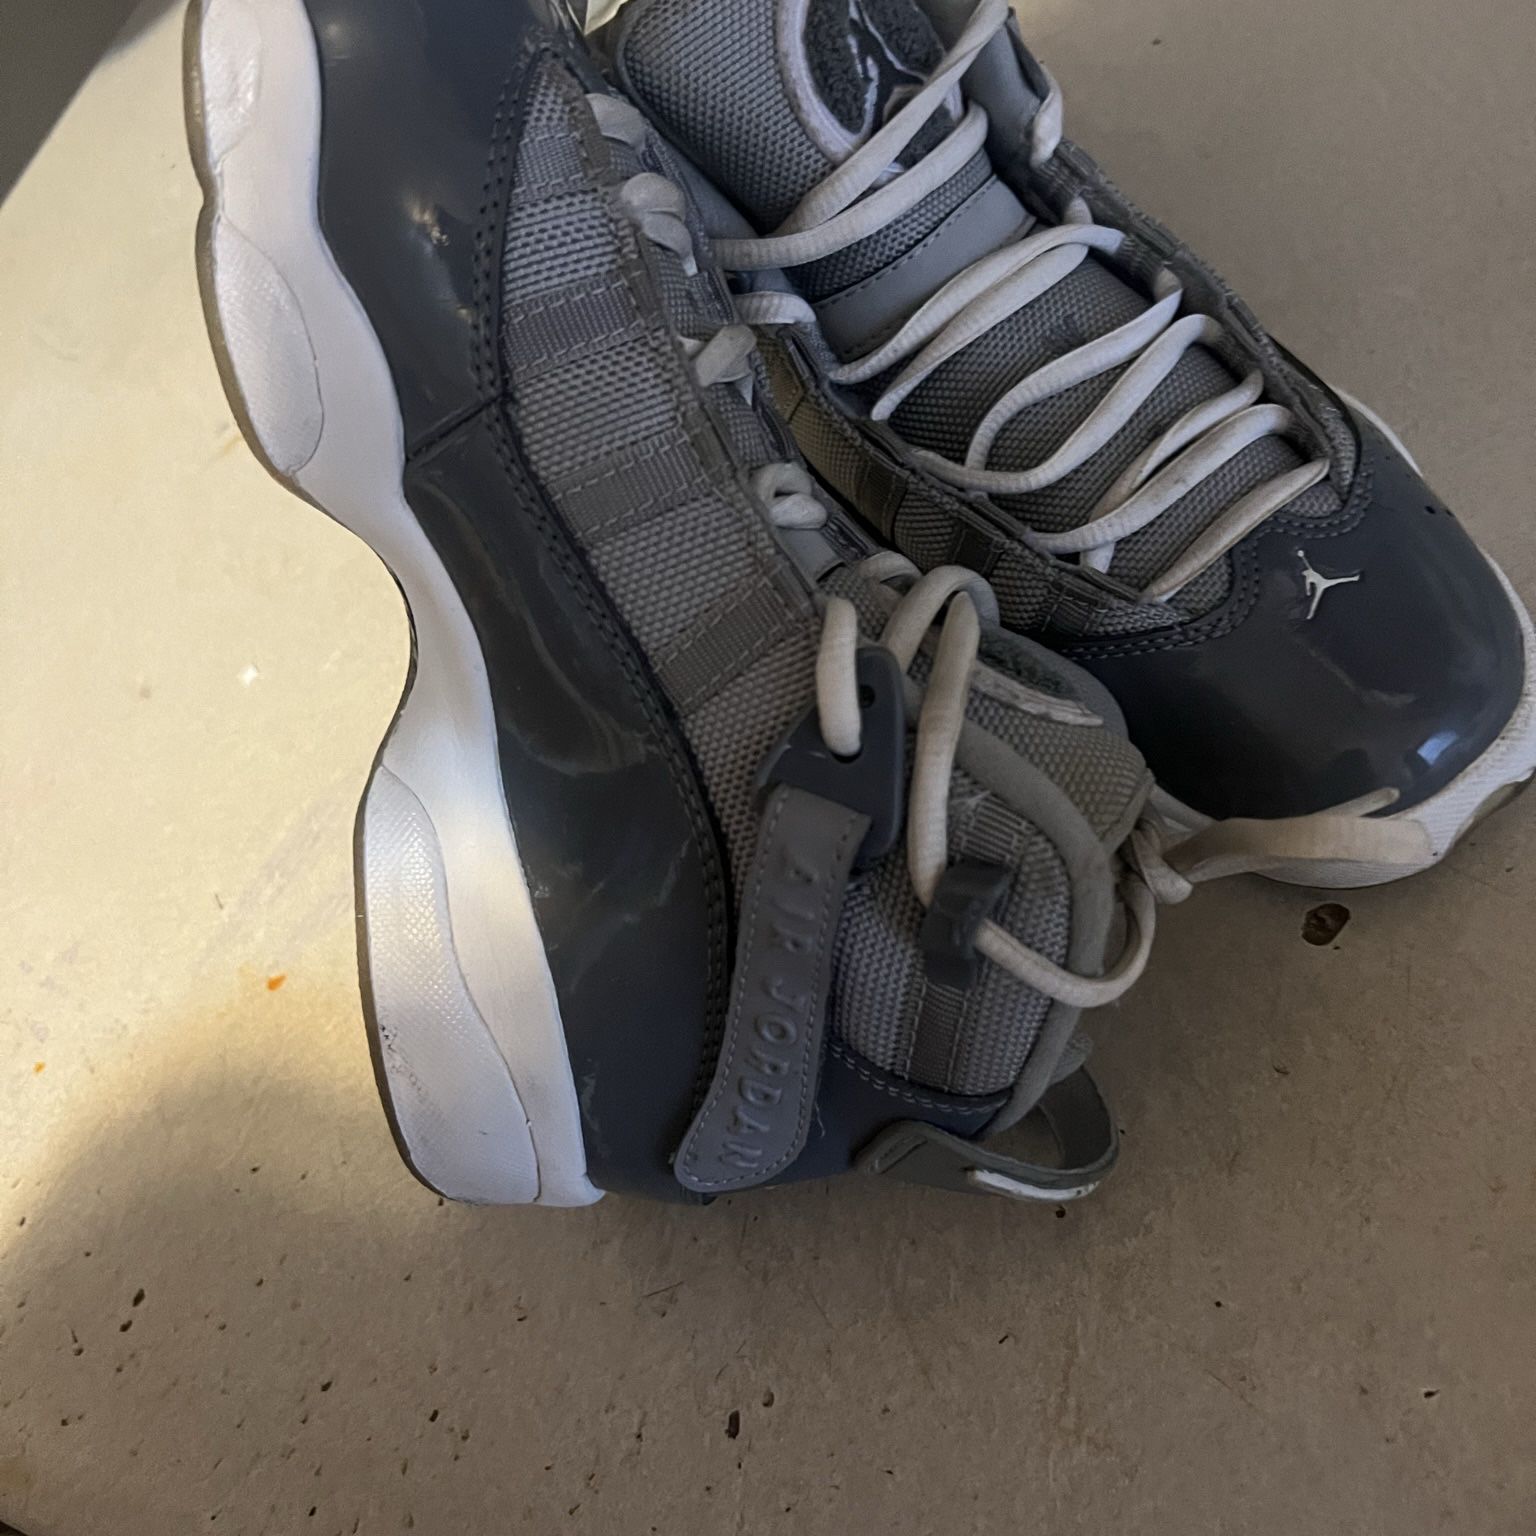 Cool Gray 11s Jordan’s,Size 4, Barely Touched!! 